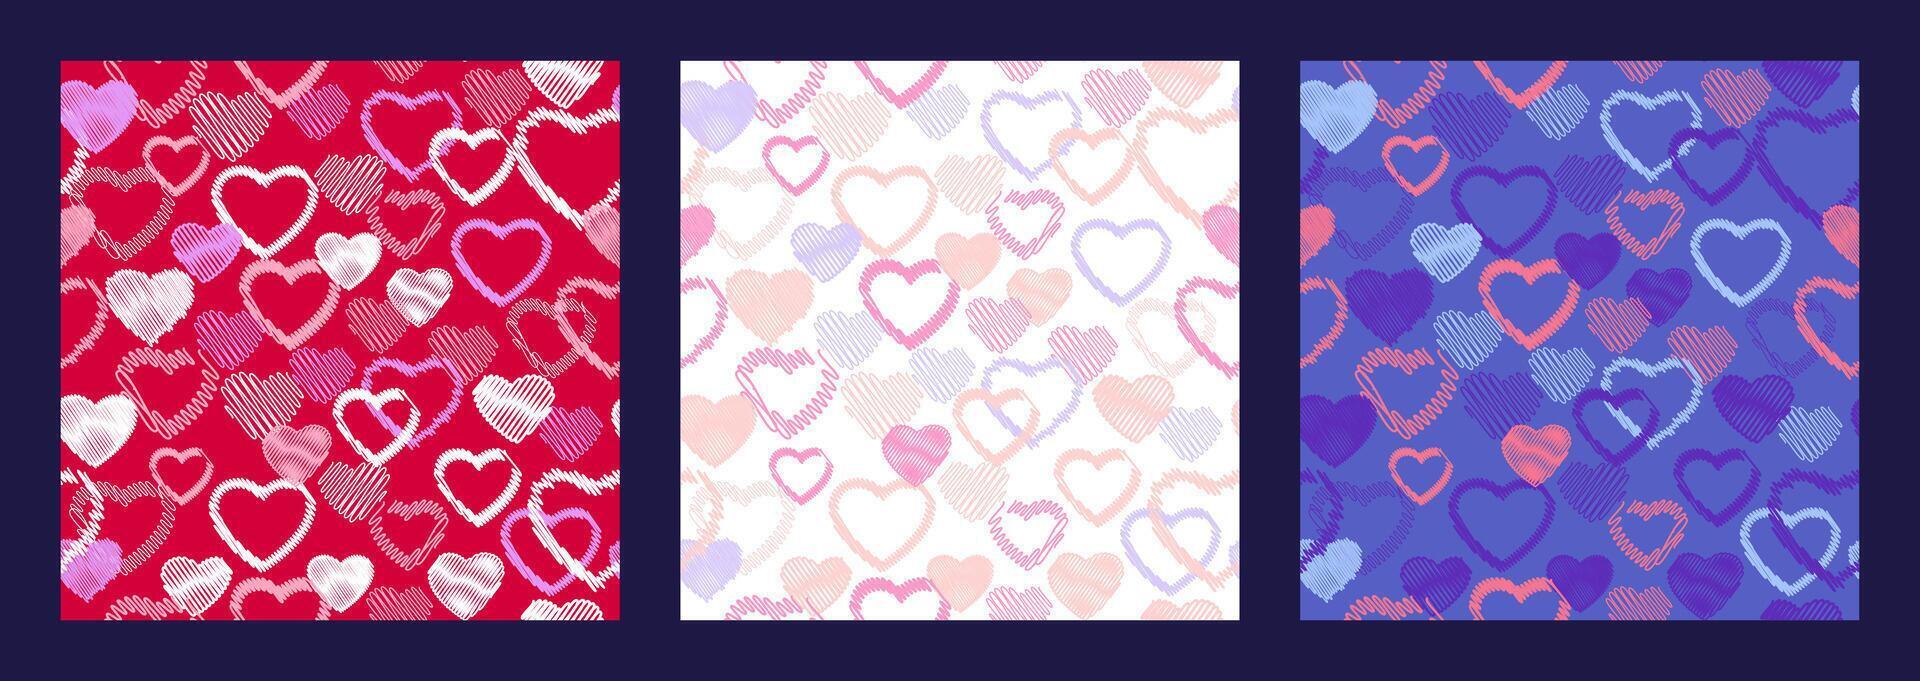 Colorful seamless pattern with hand drawn vector shape hearts. Print with set textured heart silhouettes outline. Valentine, love background. Template for textile, fashion, surface design, fabric